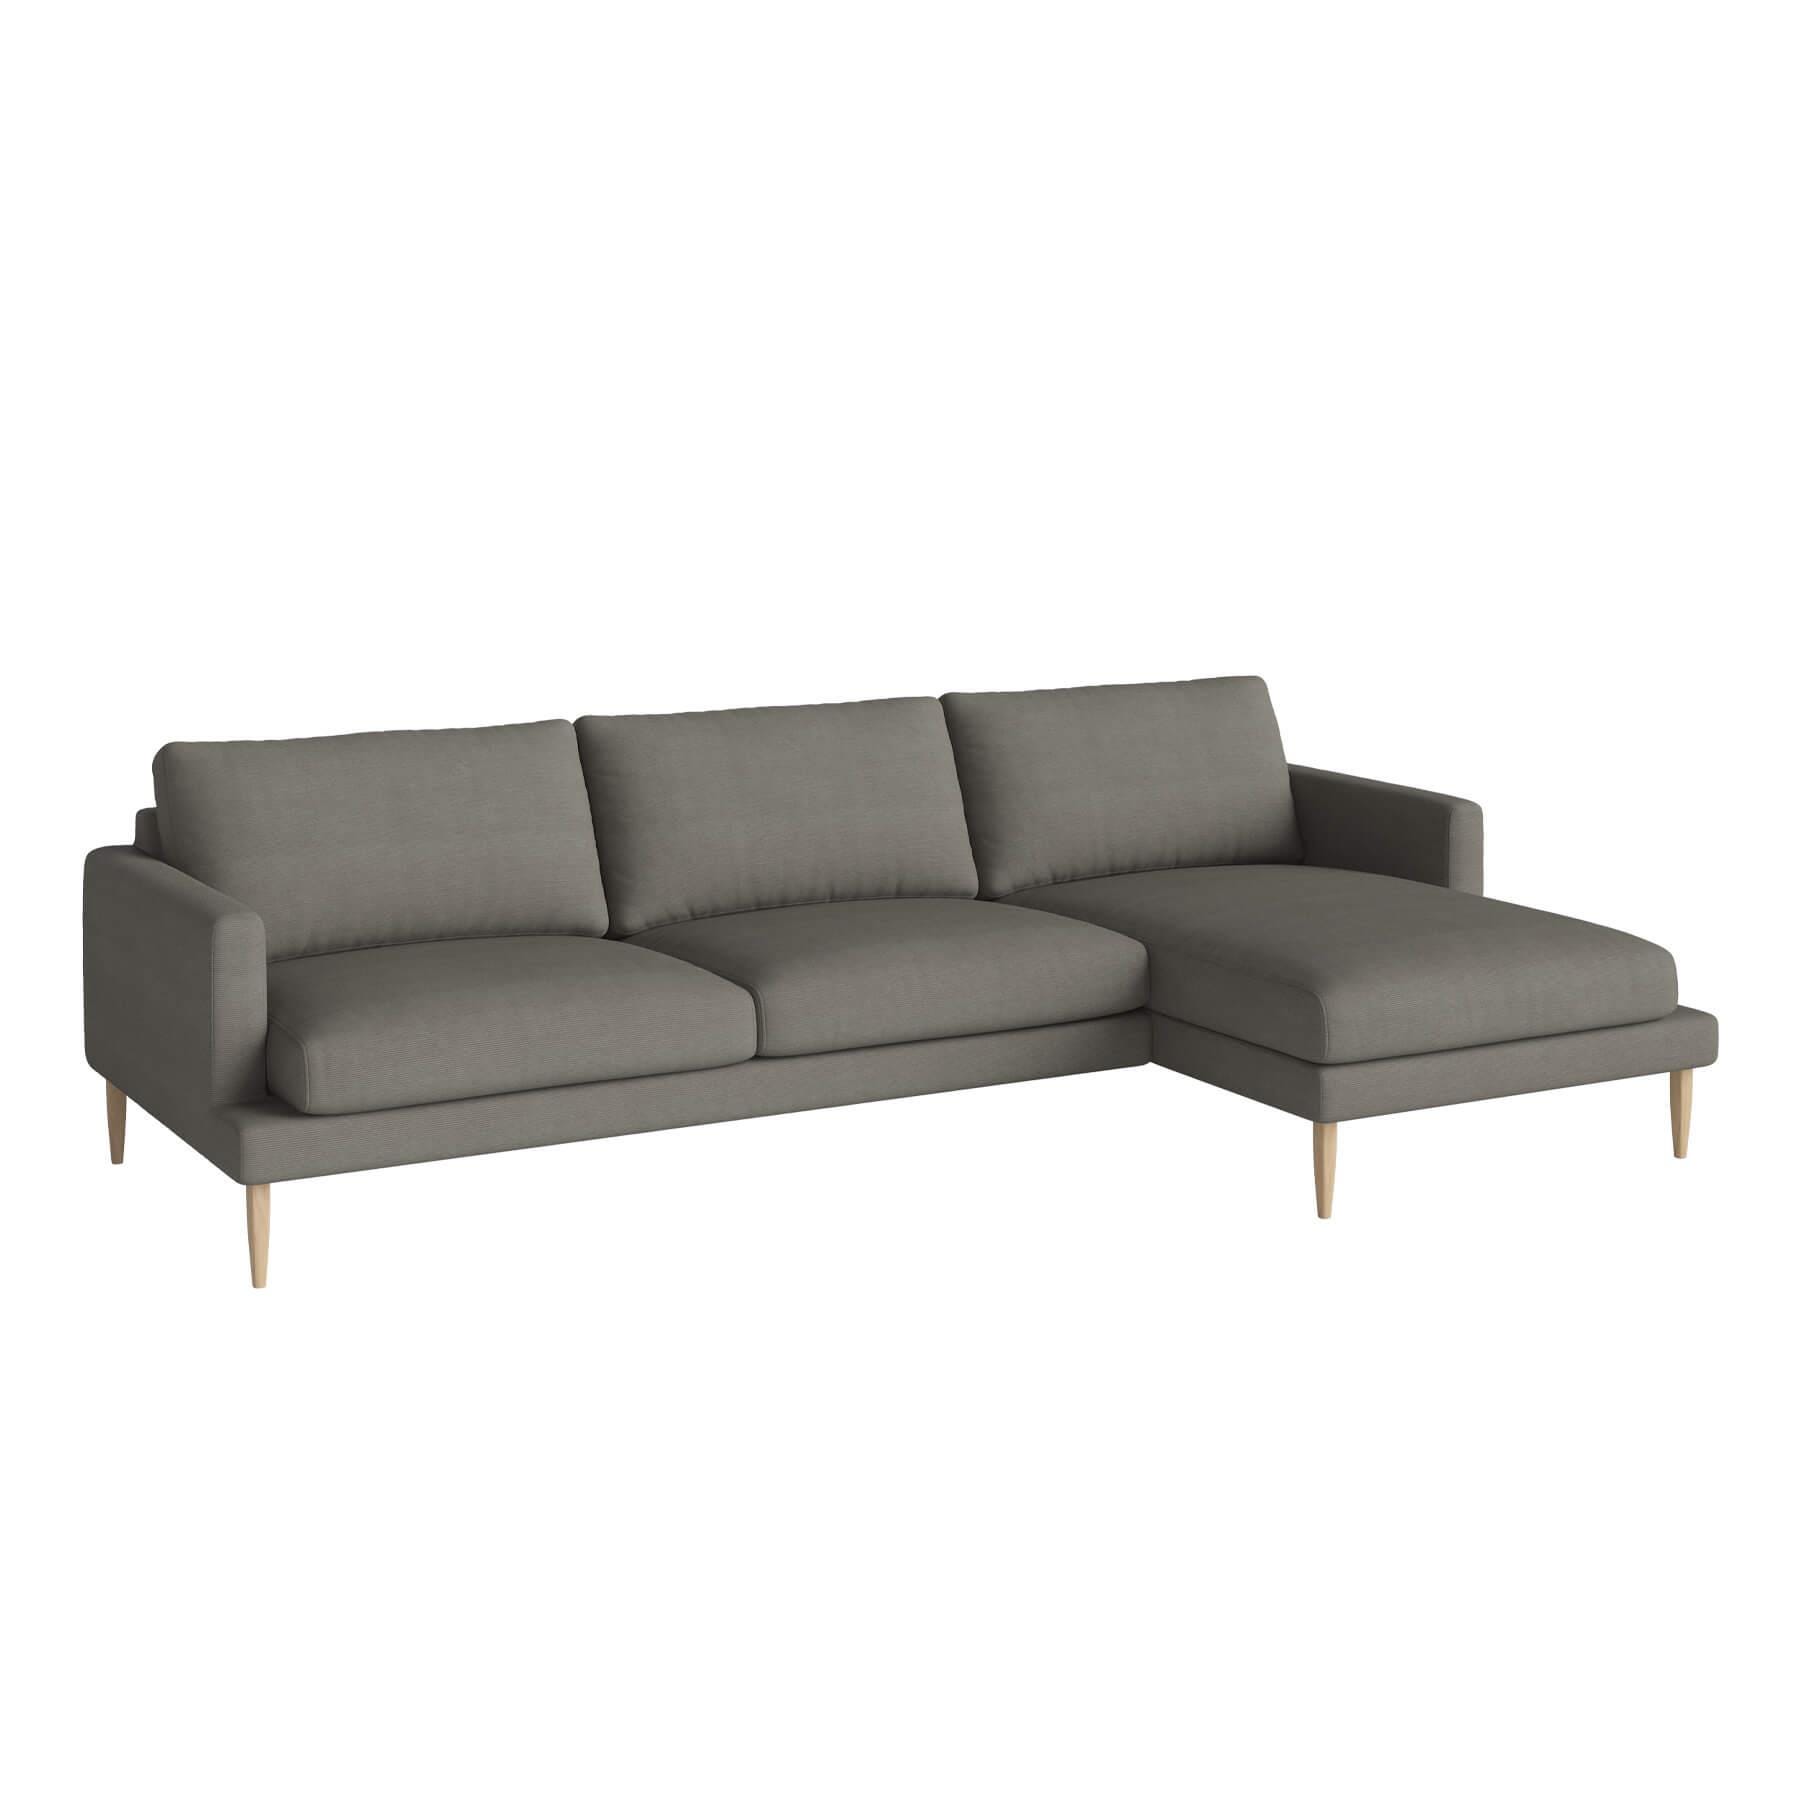 Bolia Veneda Sofa 35 Seater Sofa With Chaise Longue White Oiled Oak Linea Grey Brown Right Brown Designer Furniture From Holloways Of Ludlow